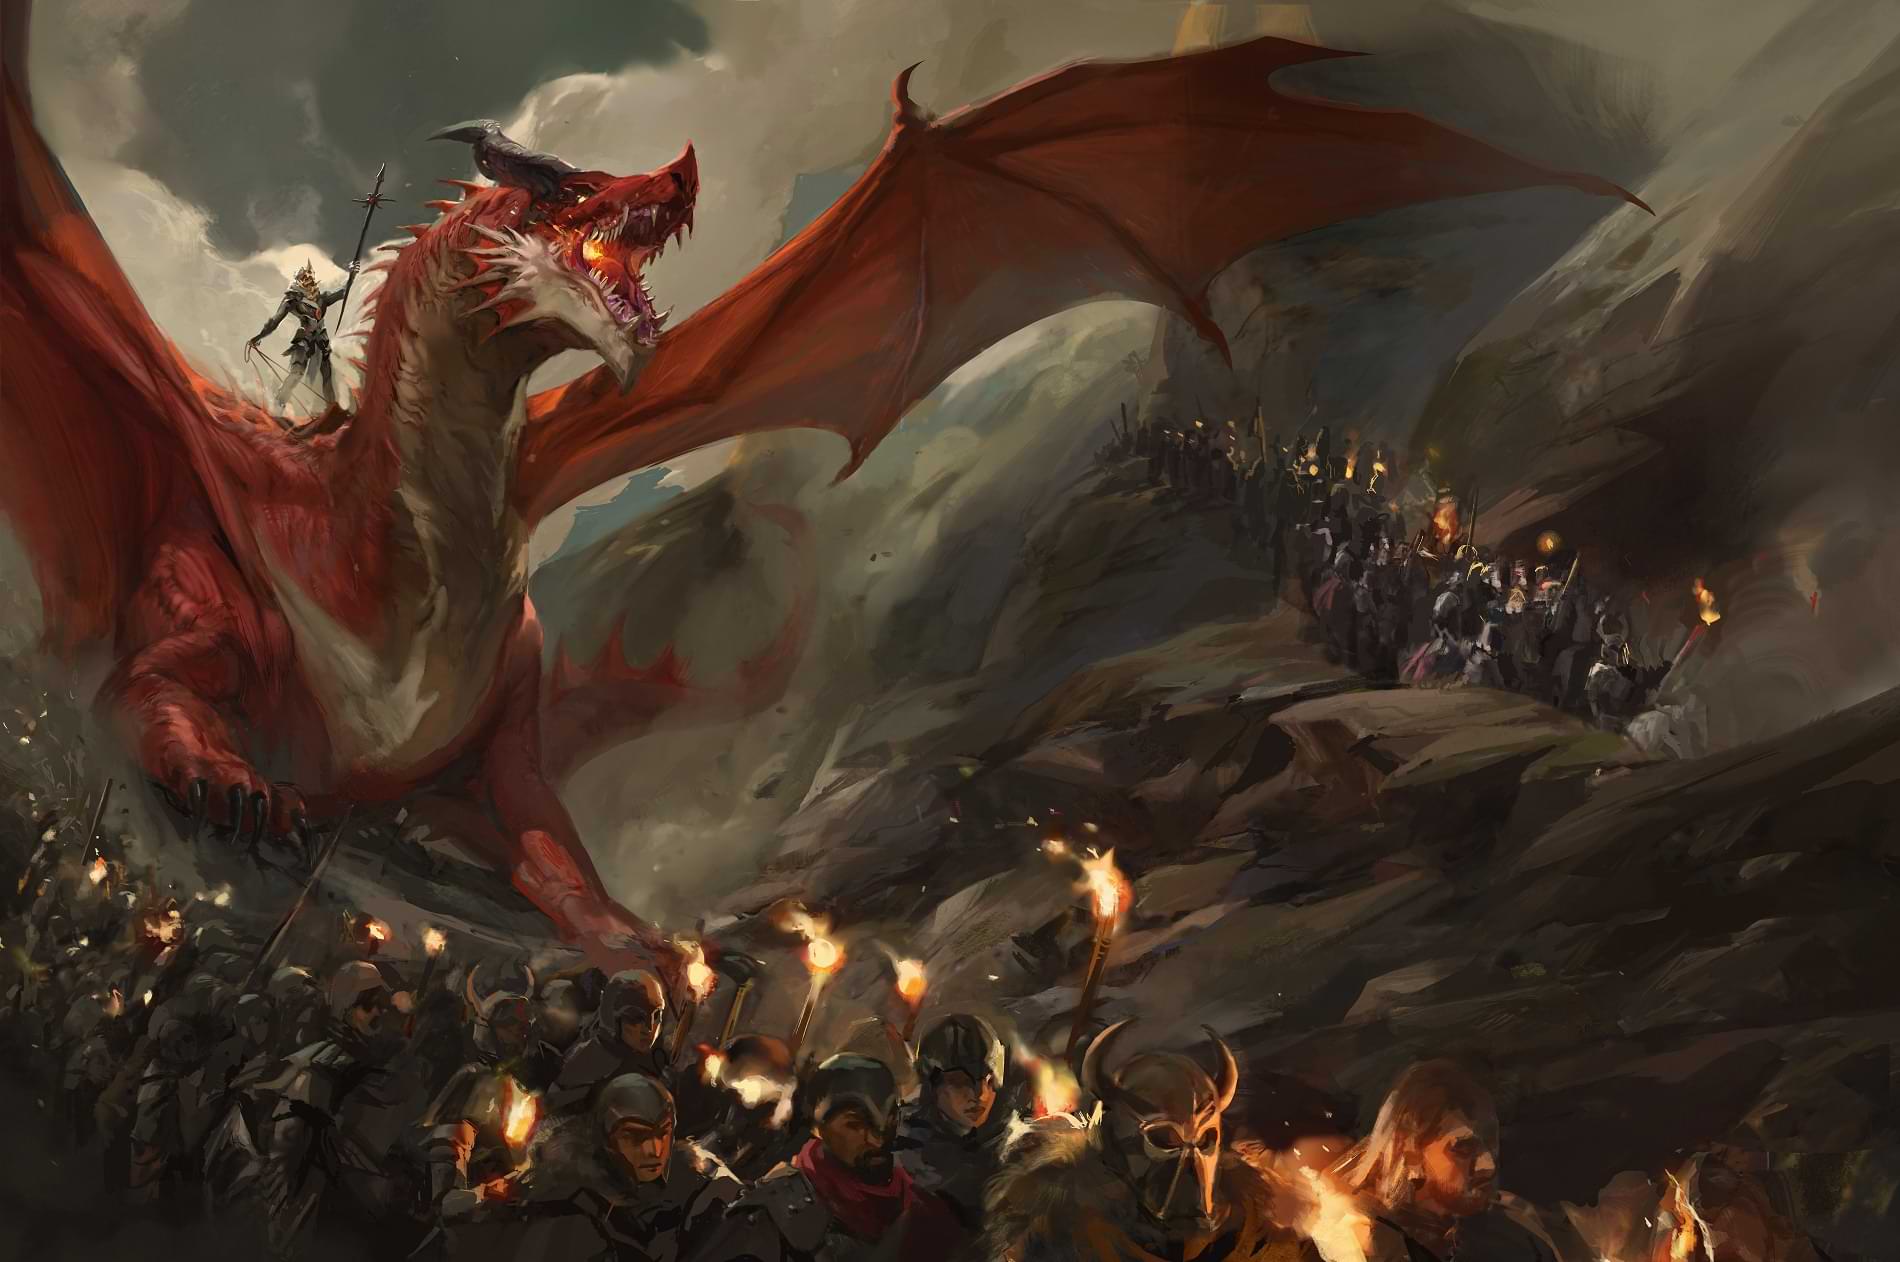 A red dragon marches alongside armored soldiers